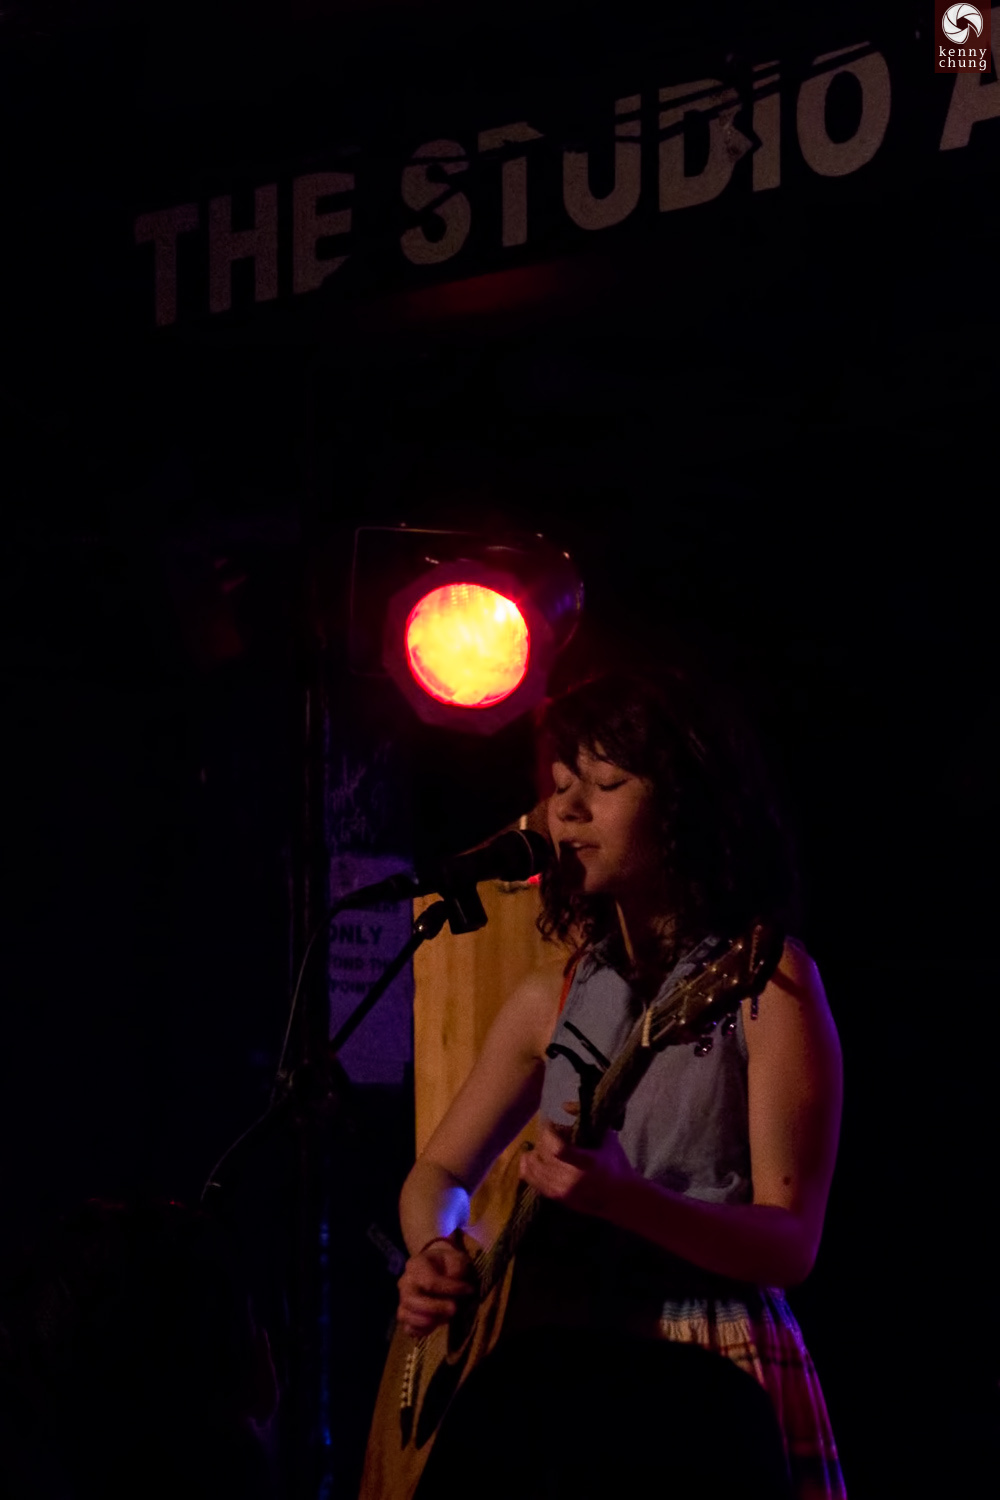 YouTube artist Mree (Marie Hsiao) performing at Webster Hall, NYC